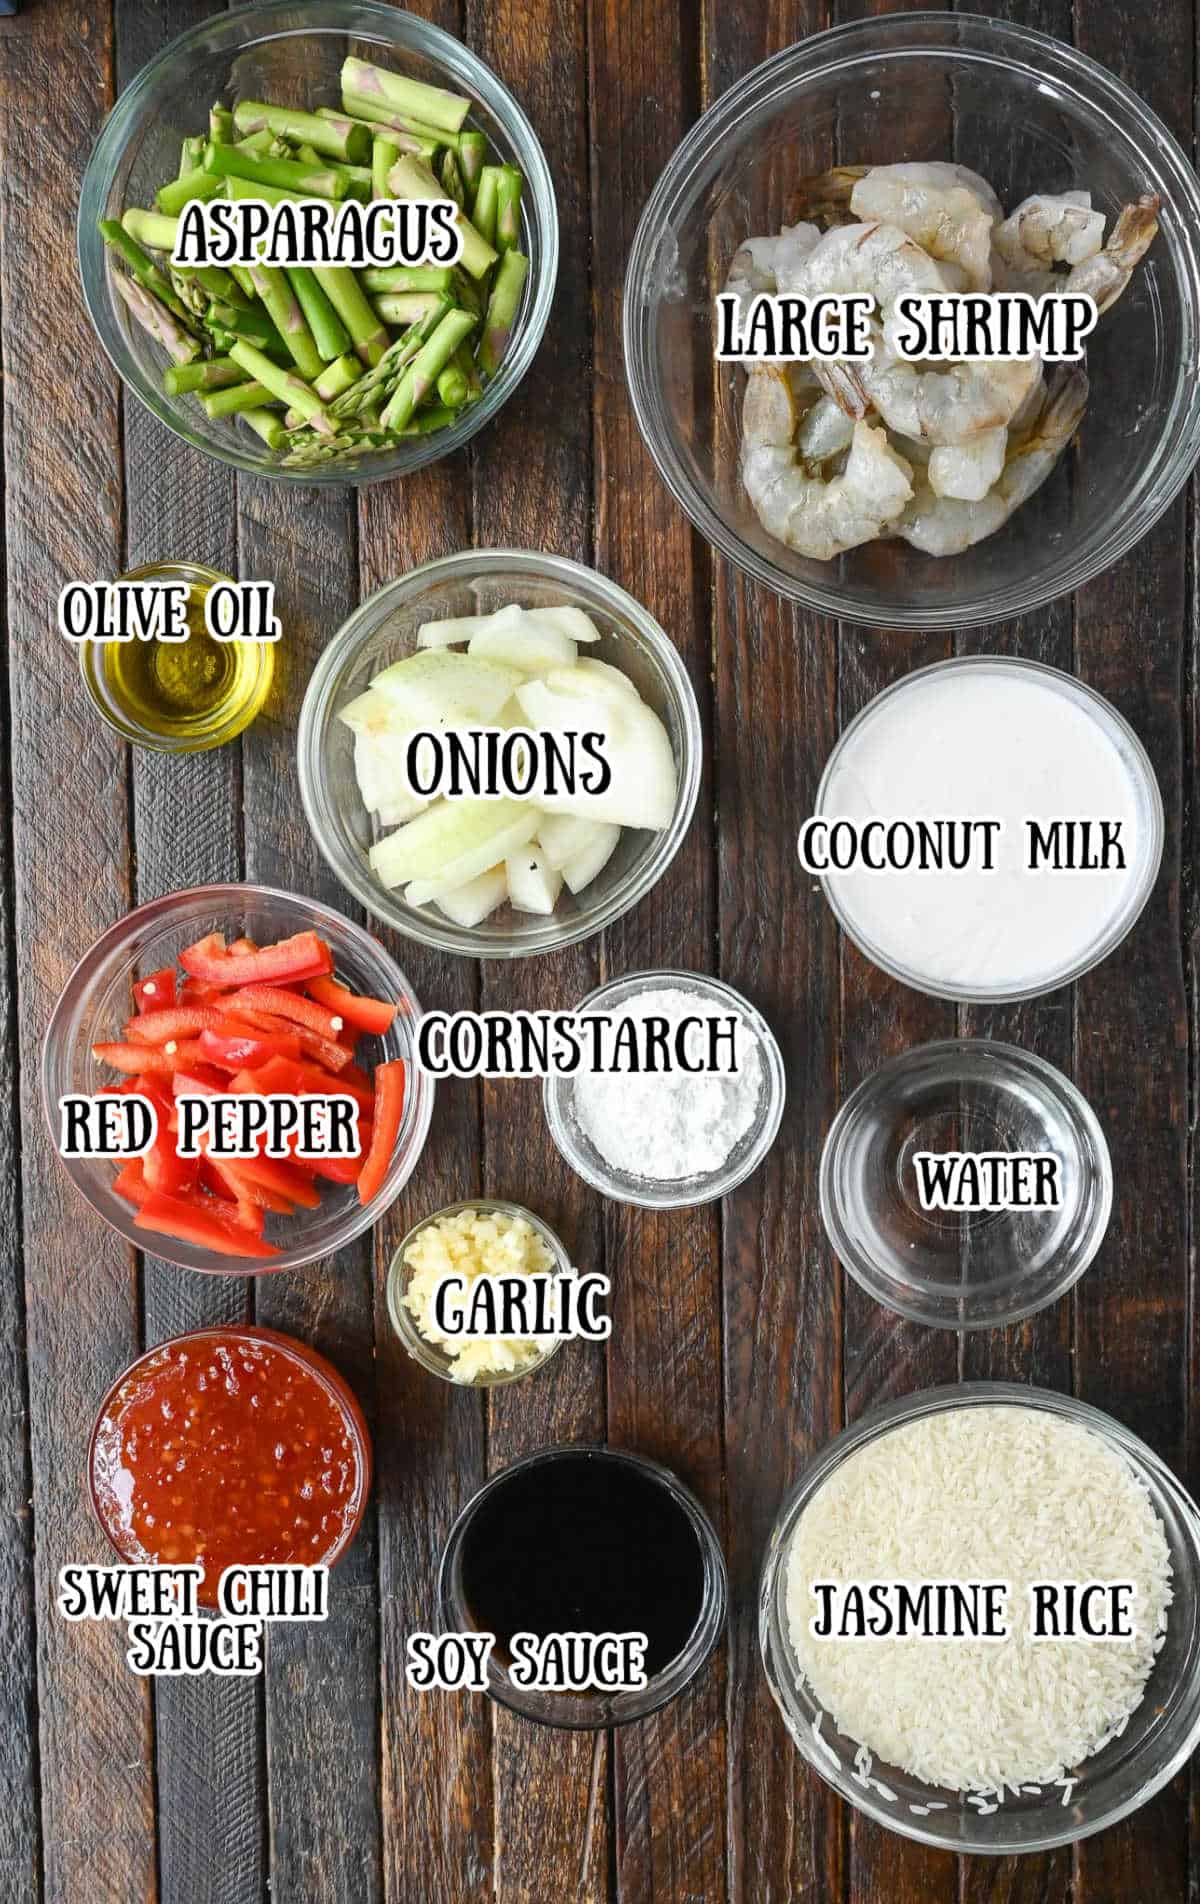 All the ingredients needed for this stir fry.